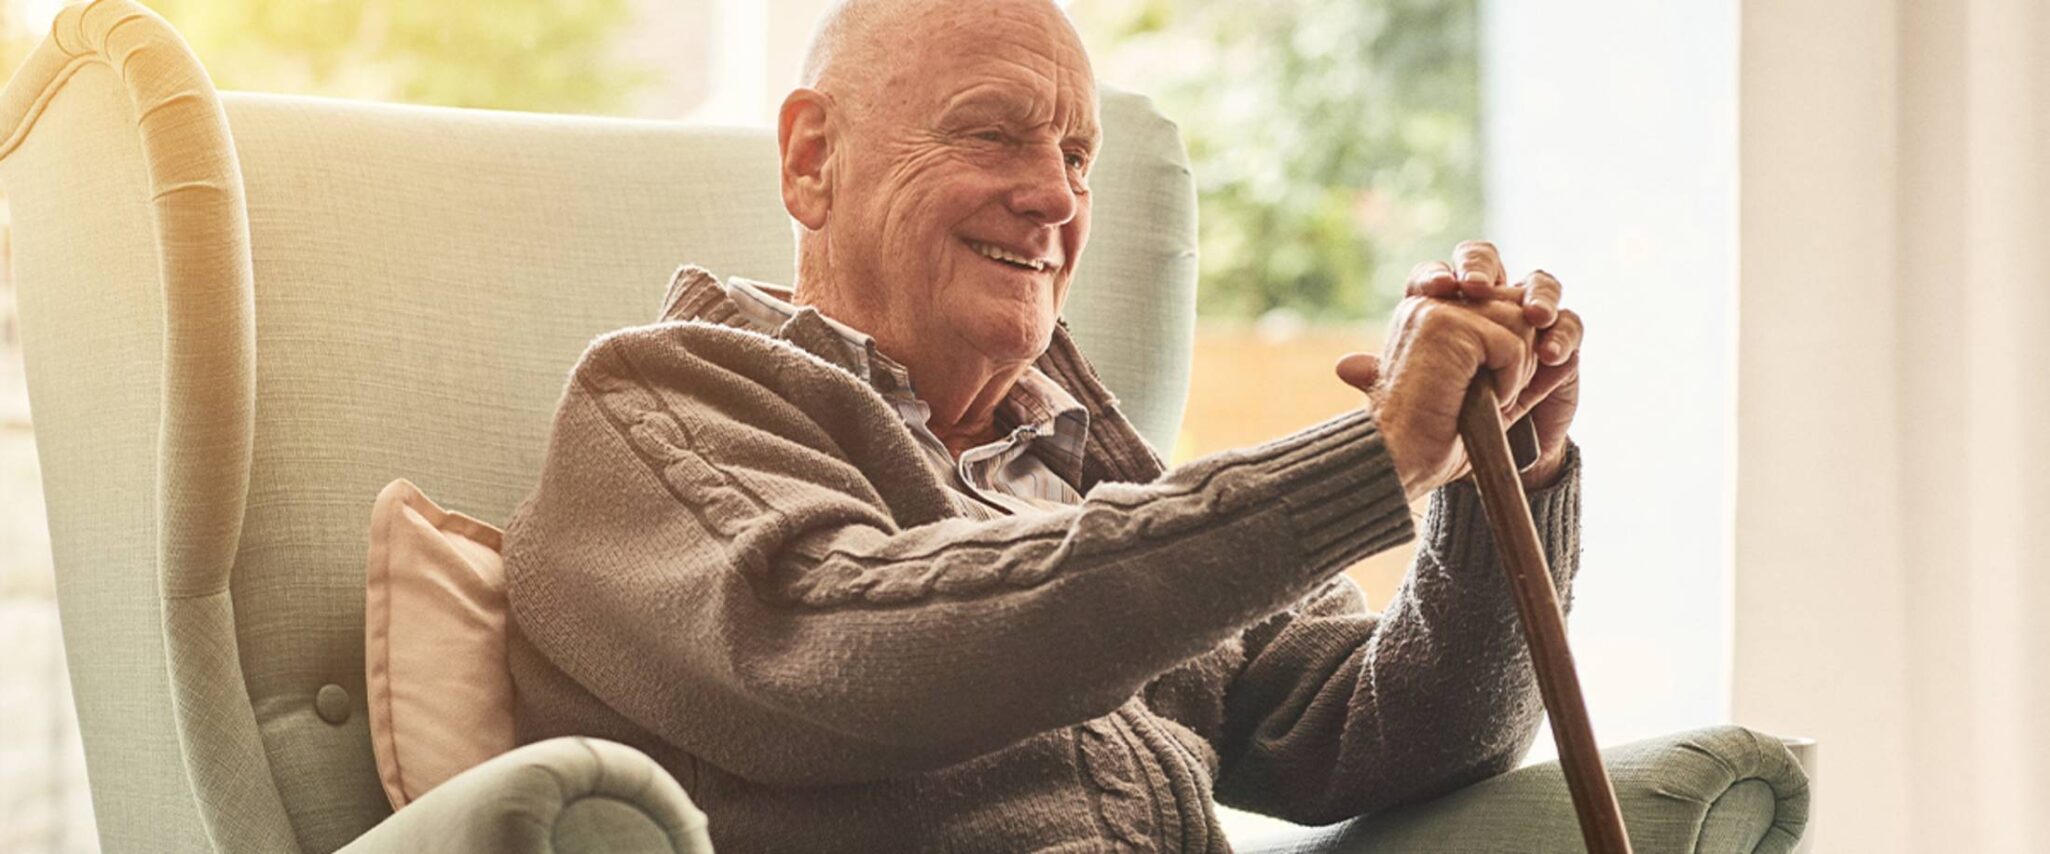 elderly man smiling while sitting on a chair with his cane in his hands